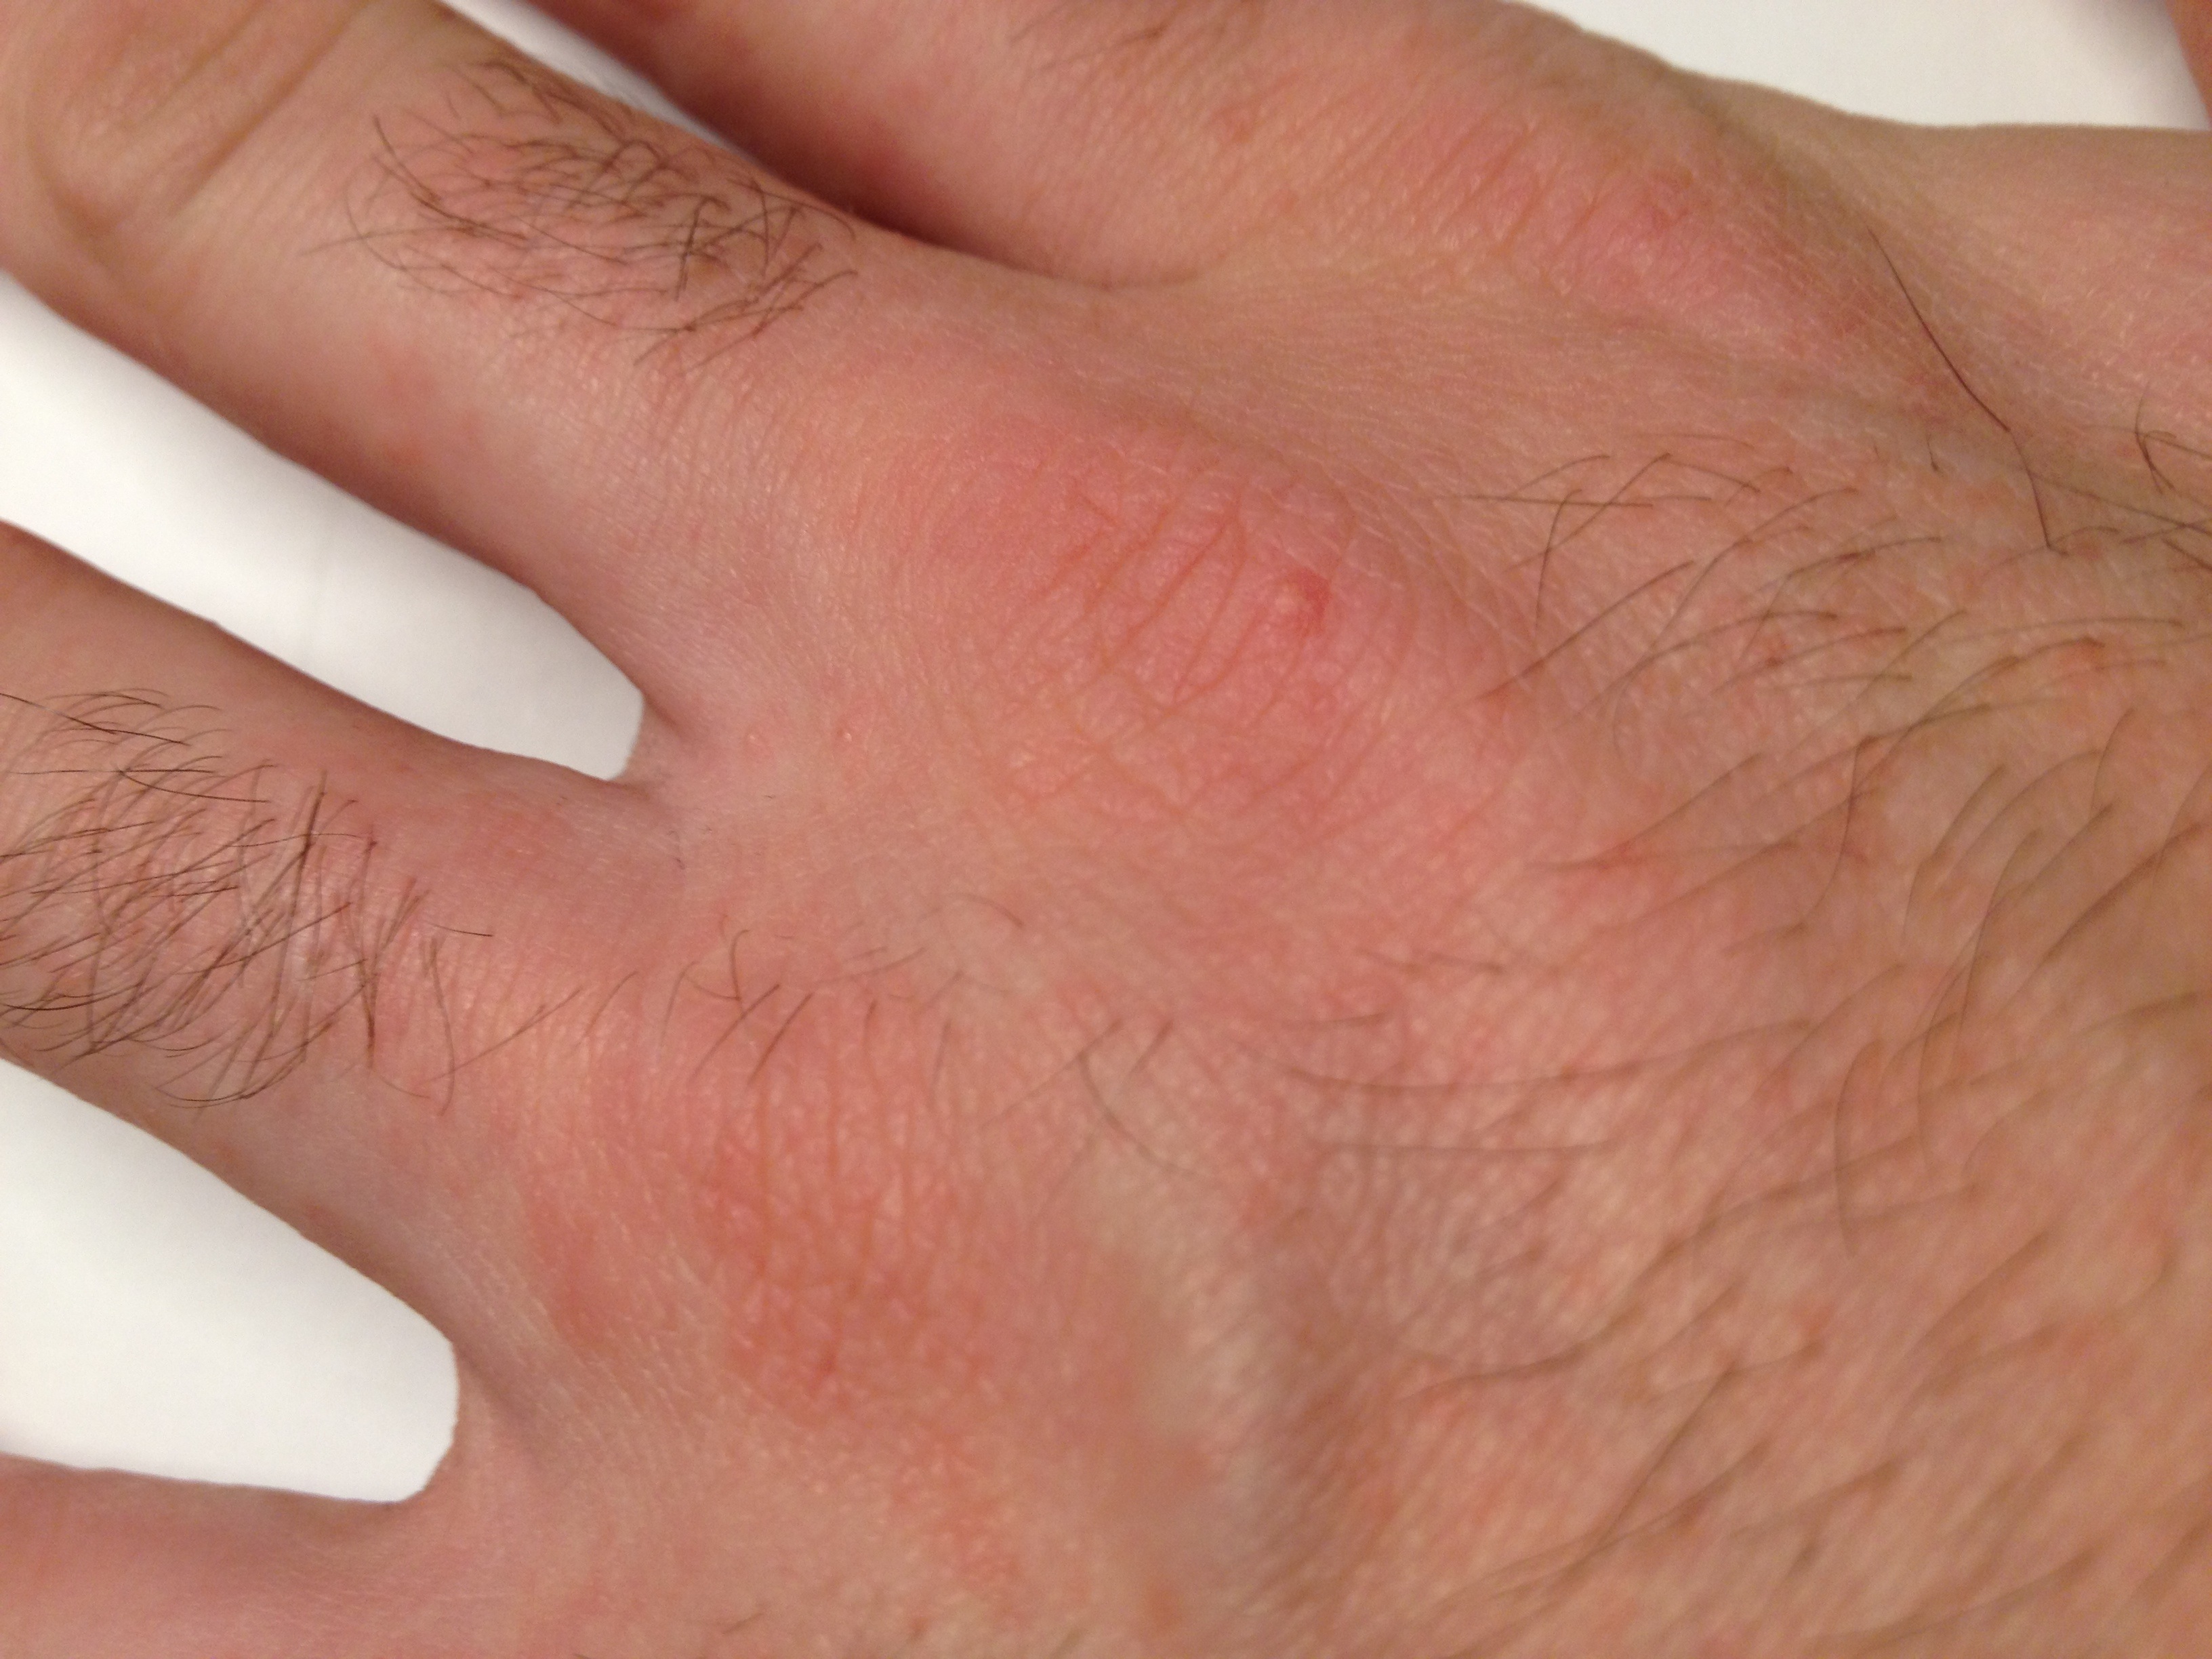 Scabies: Treatment and Scabies Rash Facts - MedicineNet